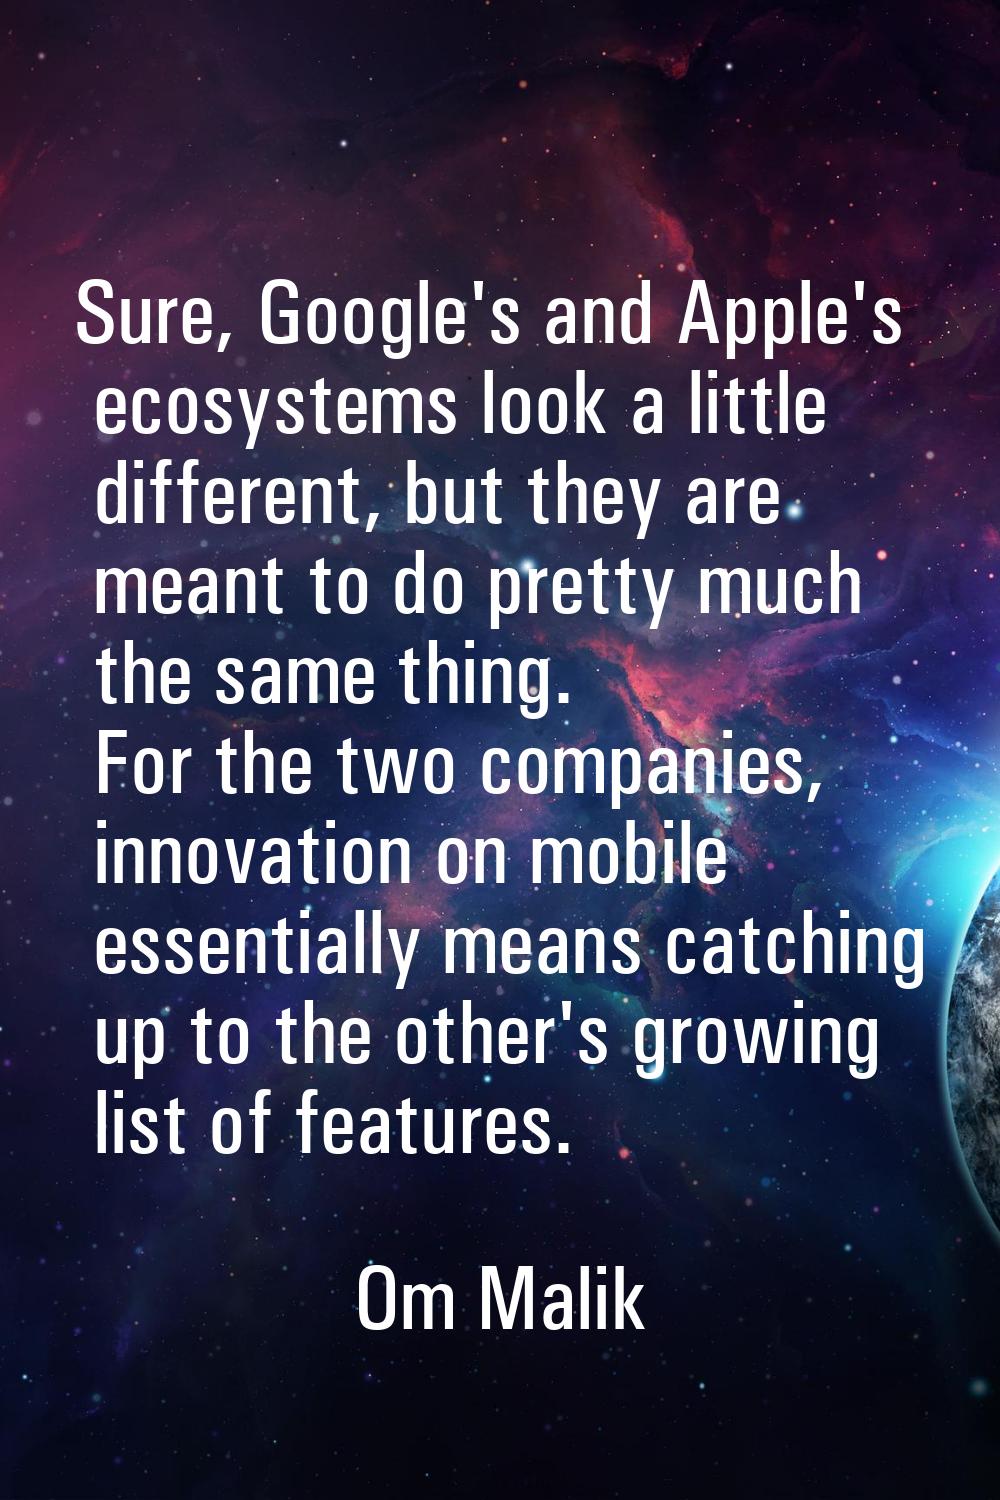 Sure, Google's and Apple's ecosystems look a little different, but they are meant to do pretty much